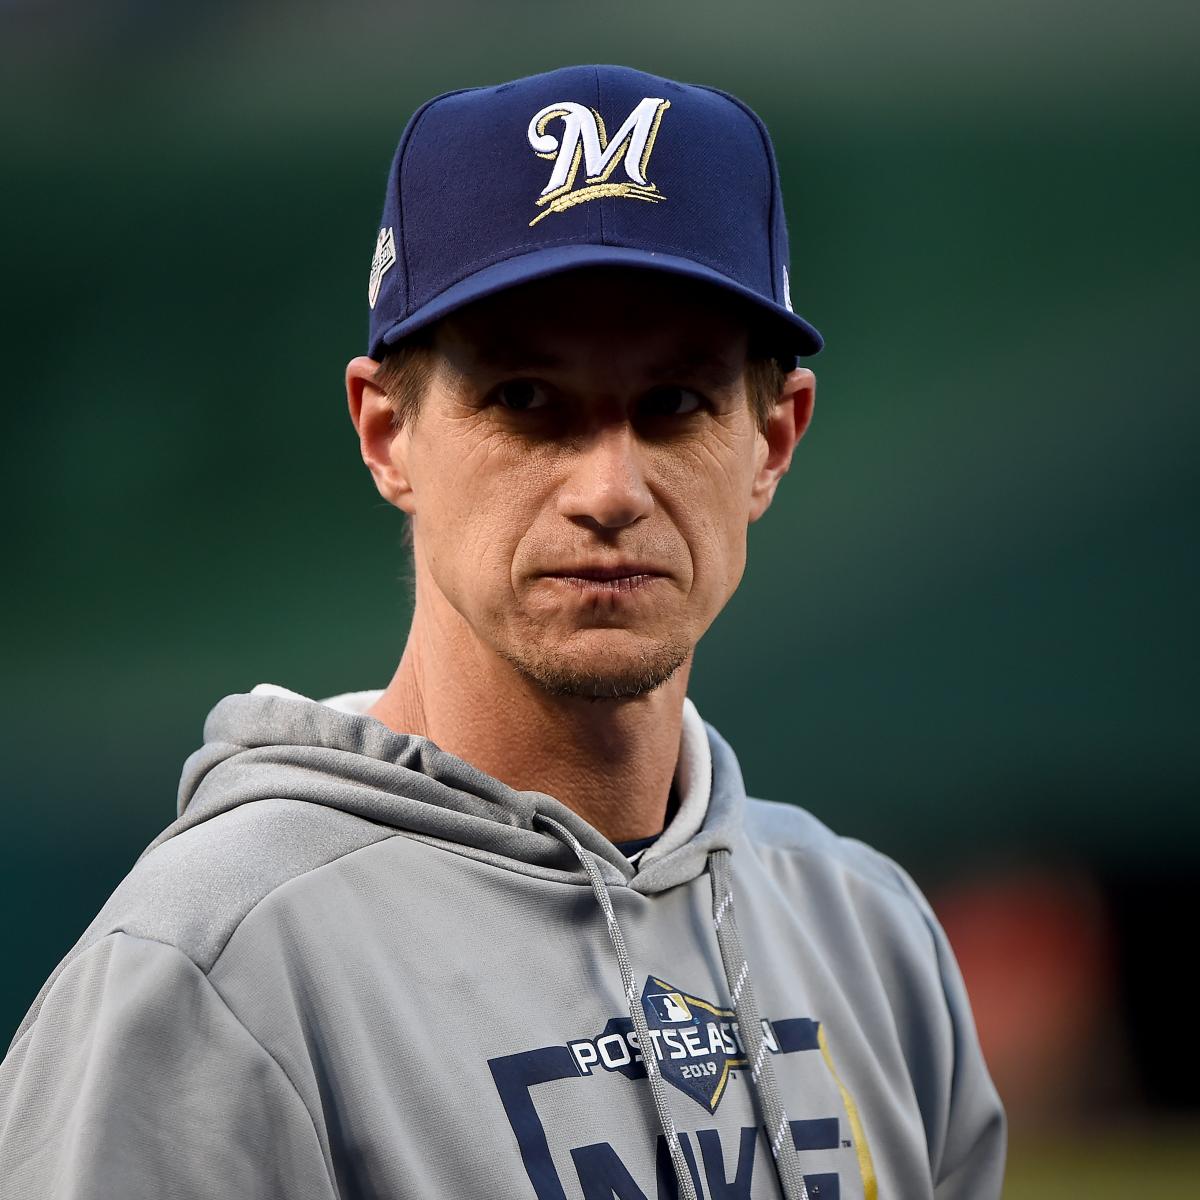 Q&A with Brewers manager Craig Counsell before 2021 spring training